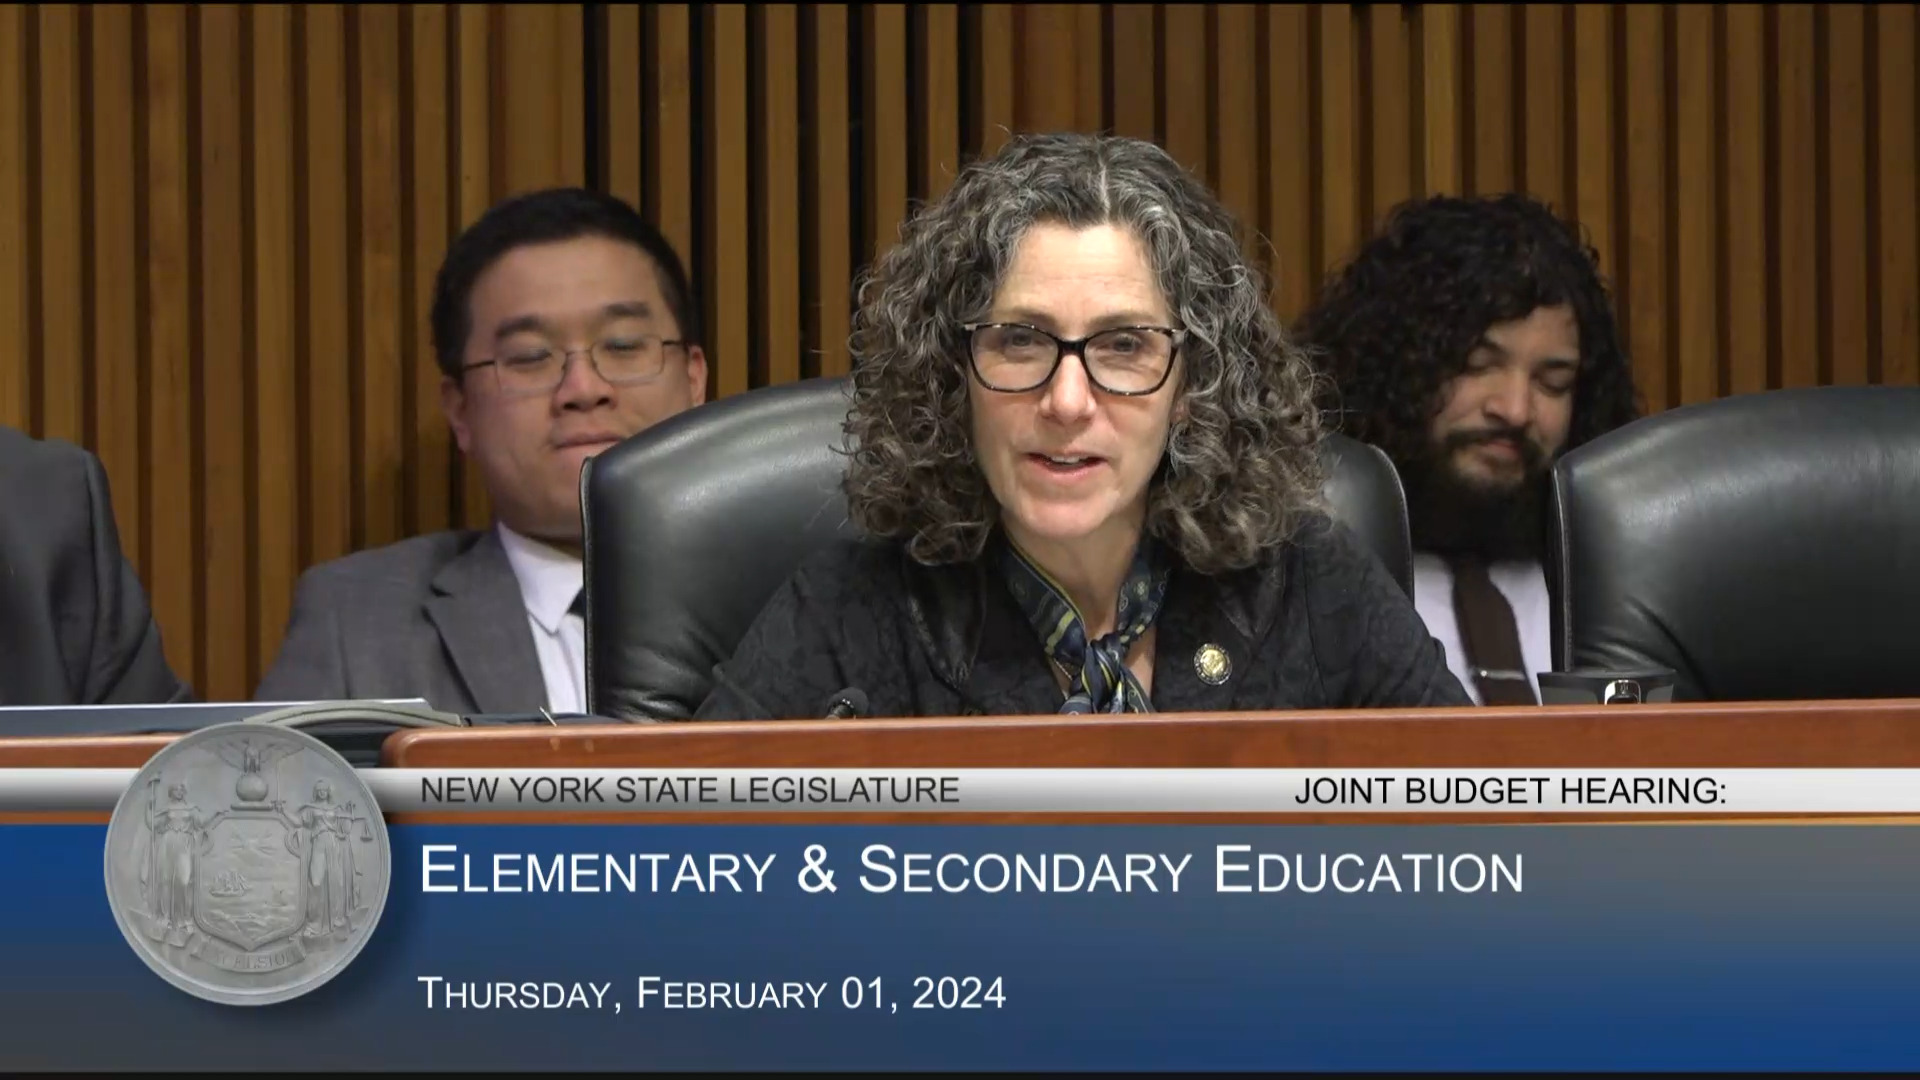 Teachers Union Officials Testify During Budget Hearing on Elementary and Secondary Education